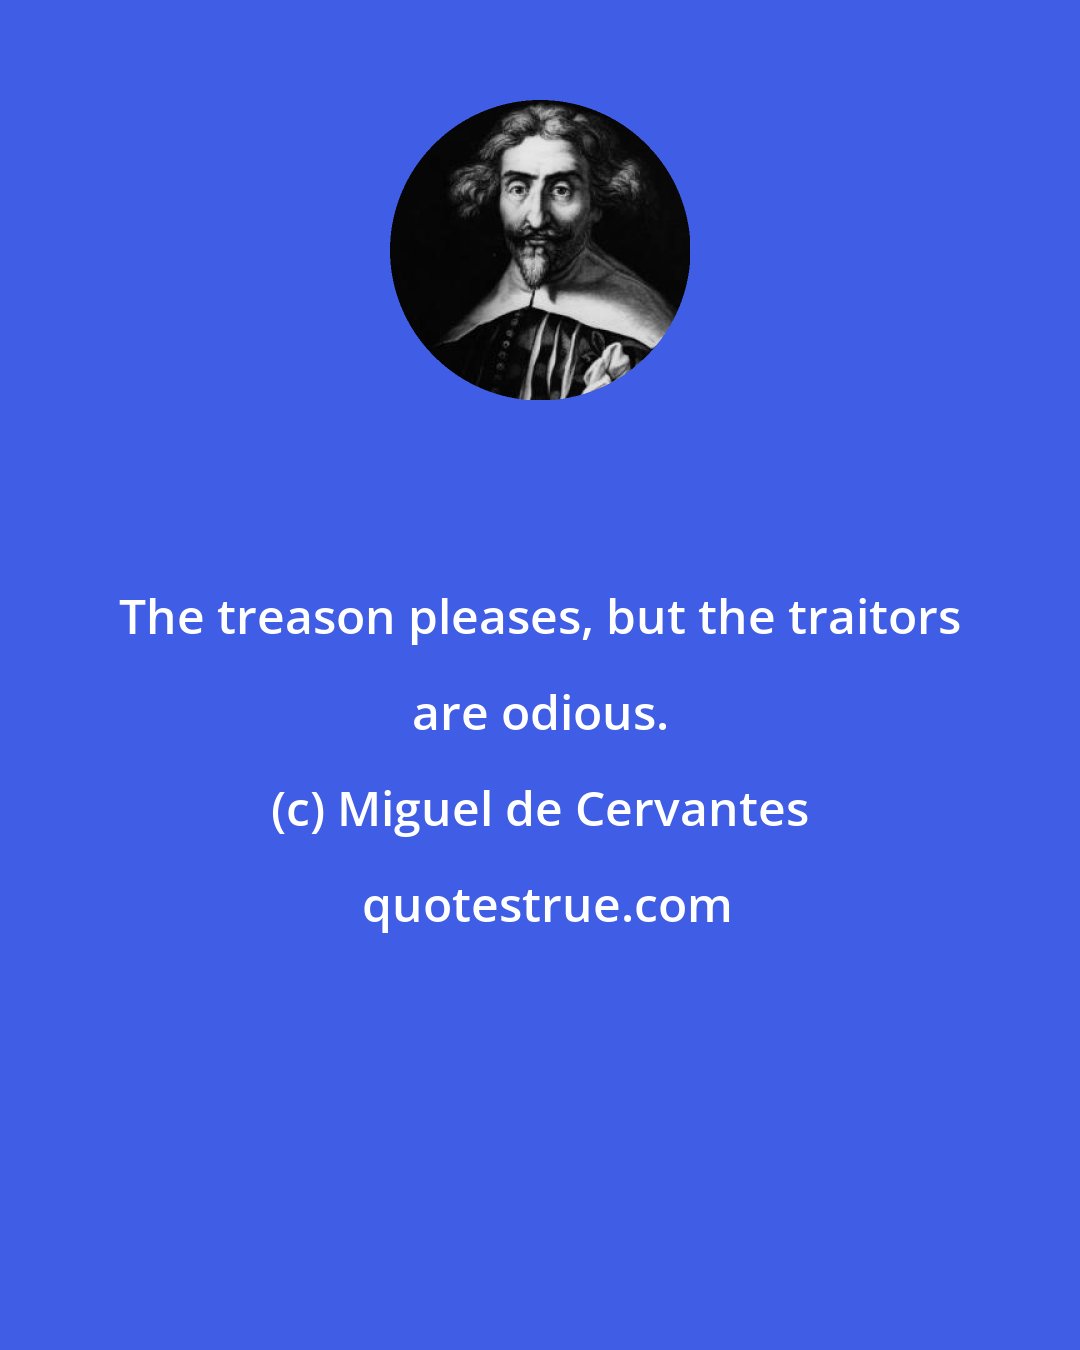 Miguel de Cervantes: The treason pleases, but the traitors are odious.